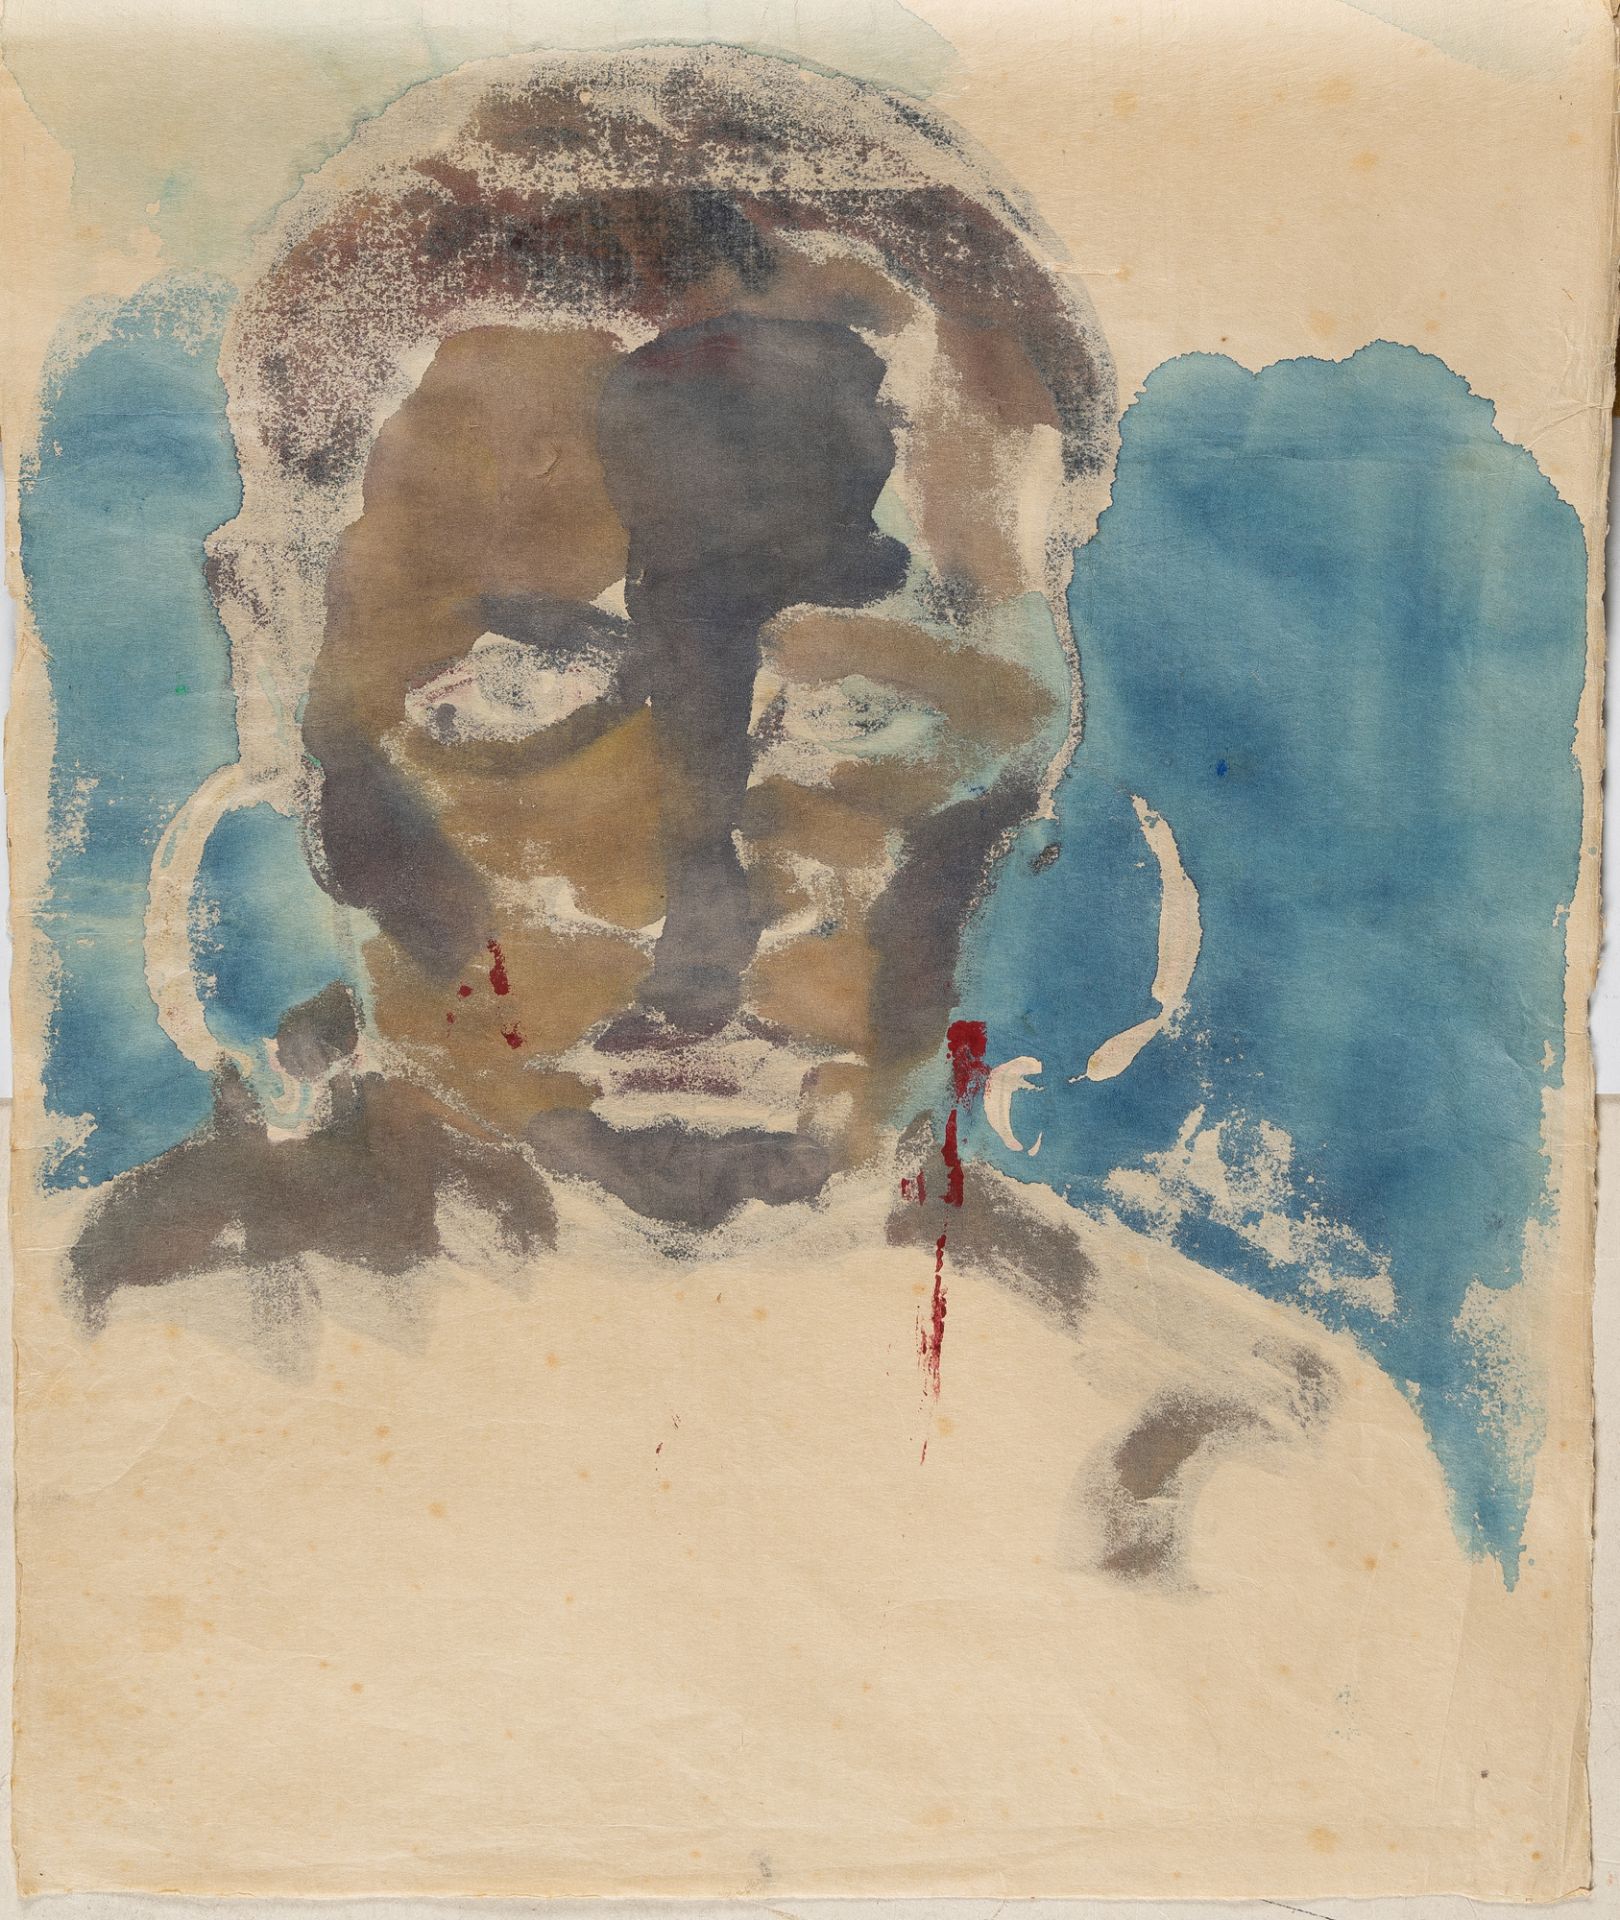 Emil Nolde (1867 Nolde - Seebüll 1956), “Papua woman”Watercolour and Indian ink on Japanese laid - Image 3 of 4